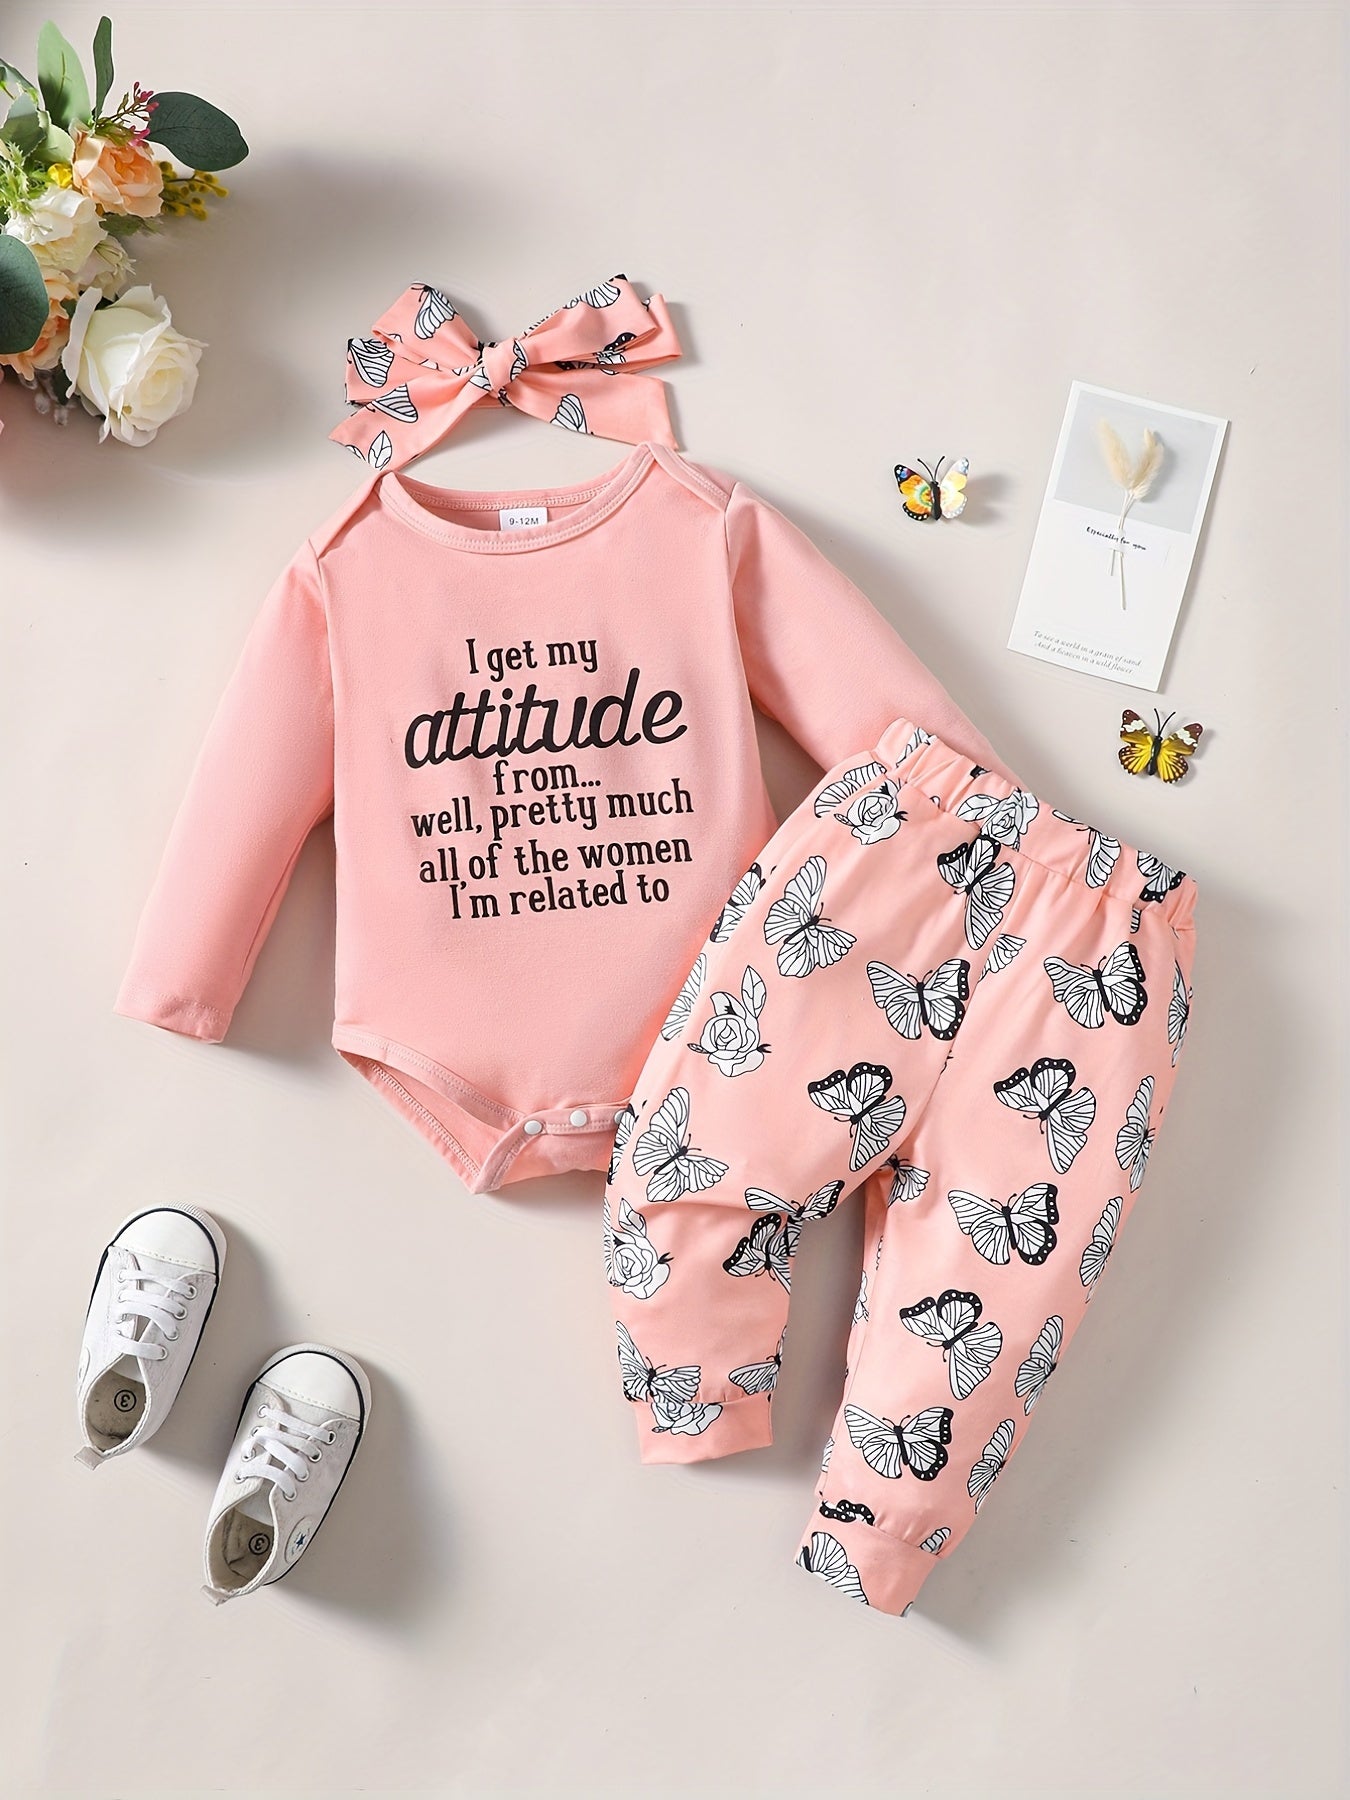 Baby Girl's Graphic Long-sleeved Romper Top + Butterflies Print Pants Set, Newborn's Cute Casual Clothes